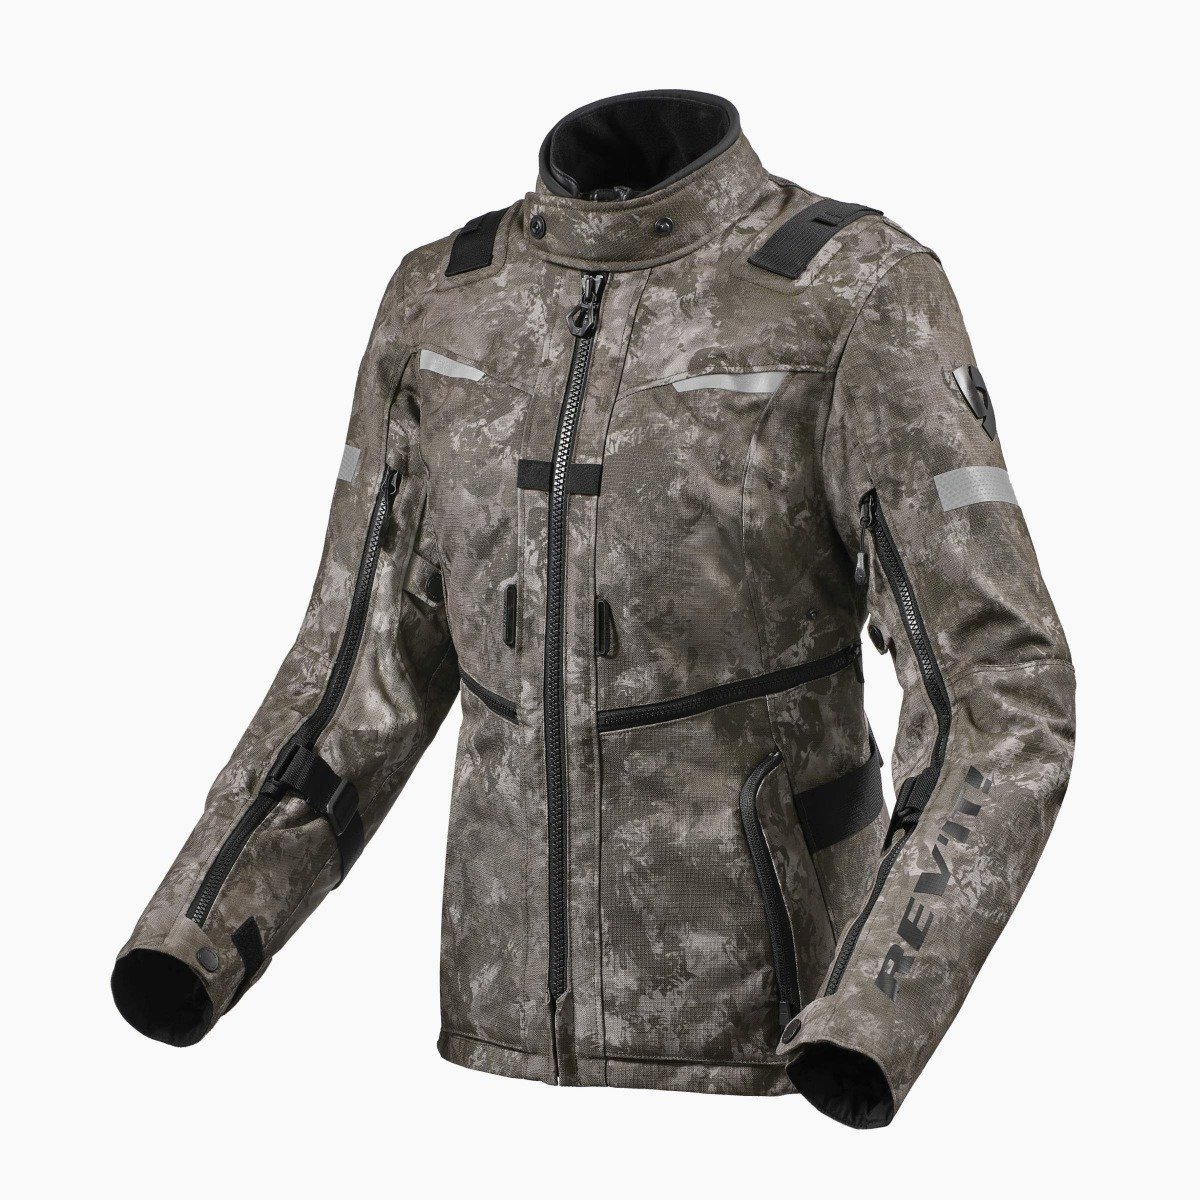 Image of REV'IT! Sand 4 H2O Jacket Lady Camo Brown Size 42 ID 8700001311632